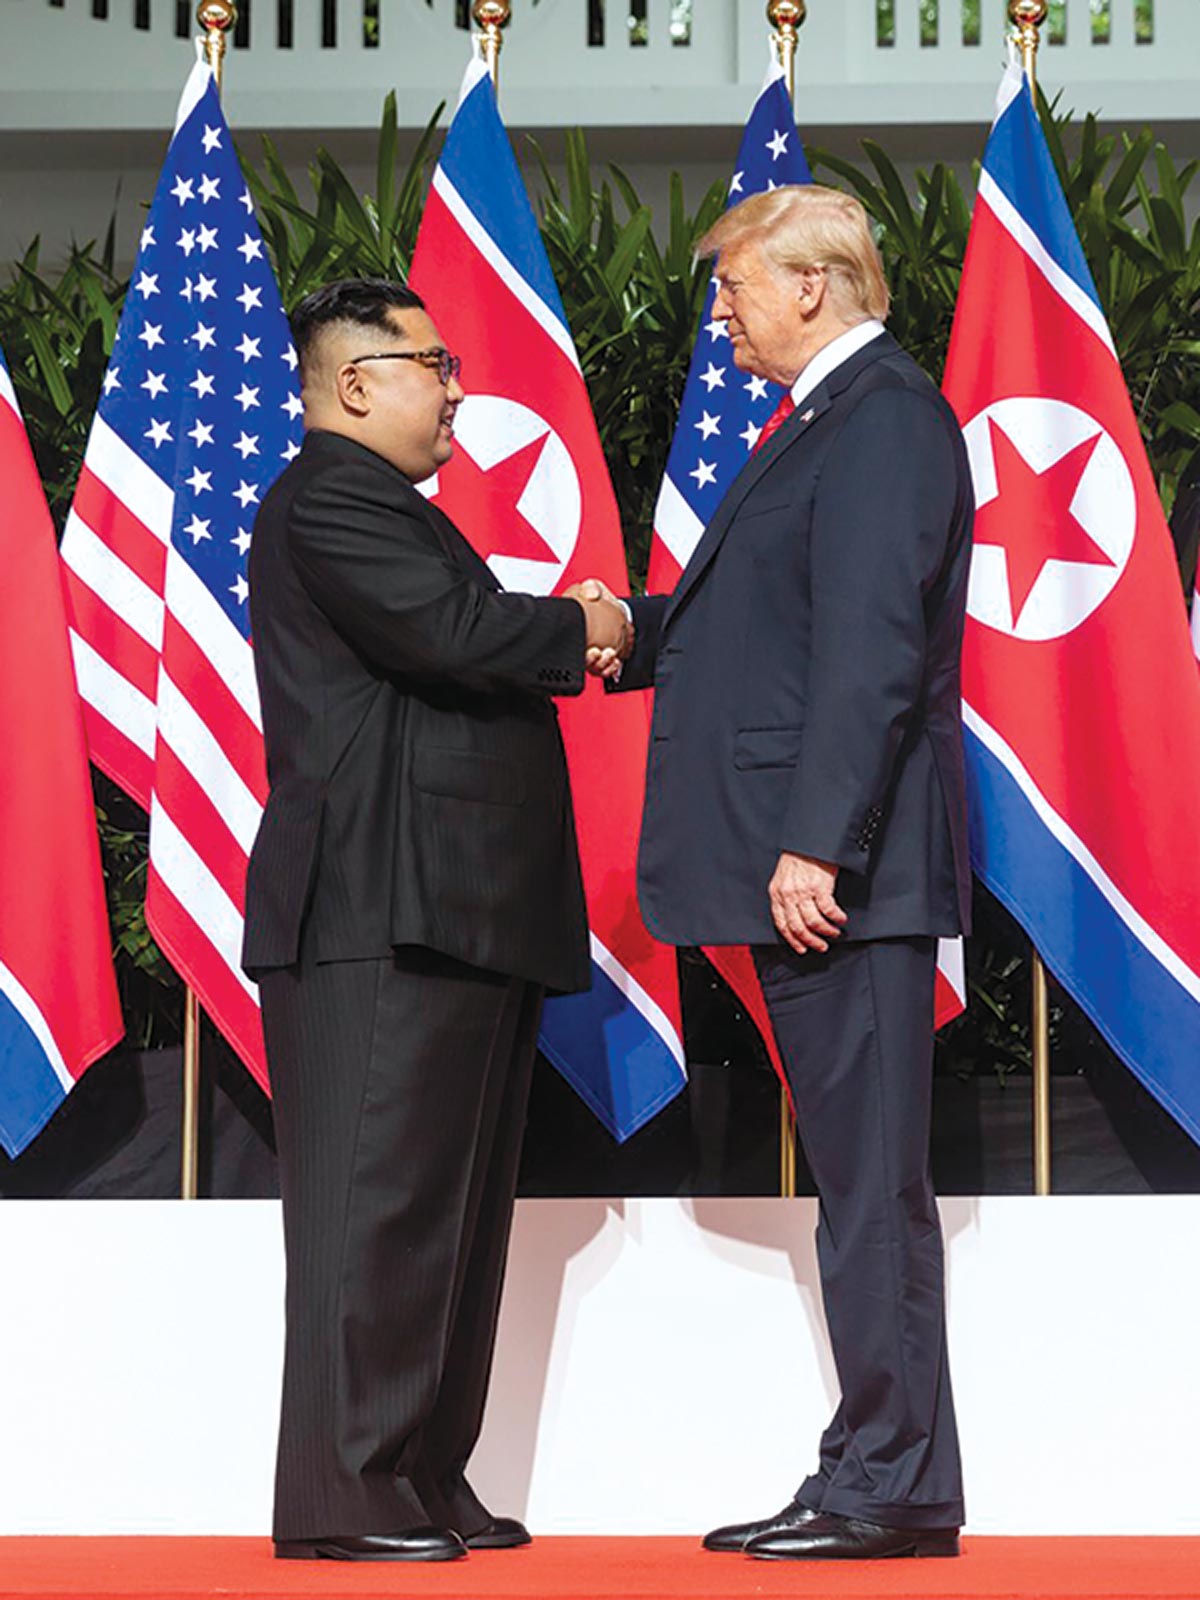 North Korean leader Kim Jong-un shakes hands with President Donald J. Trump after taking part in a signing ceremony 12 June 2018 at the end of their historic U.S.-North Korea summit at the Capella Hotel on Sentosa Island, Singapore. Photo by Shealah Craighead, Official White House